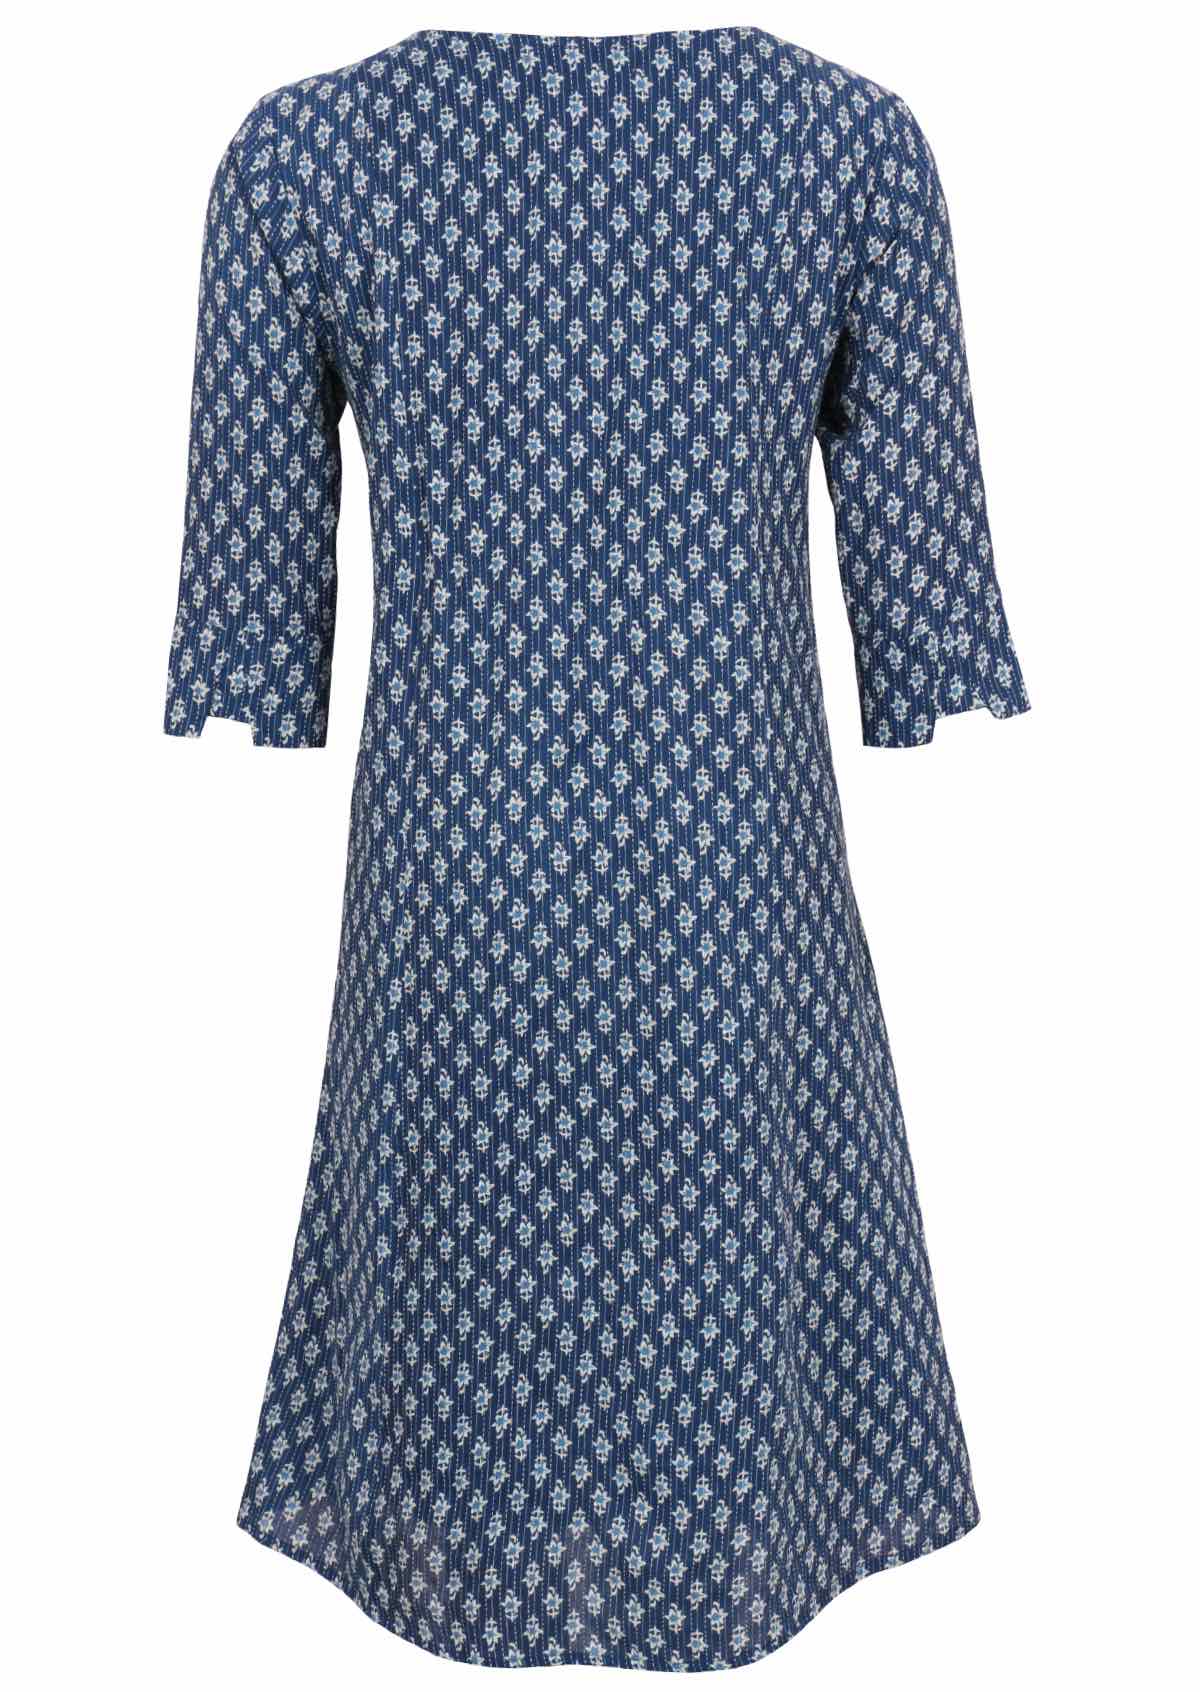 Sweet blue floral print cotton dress with 3/4 sleeves with cuff detail